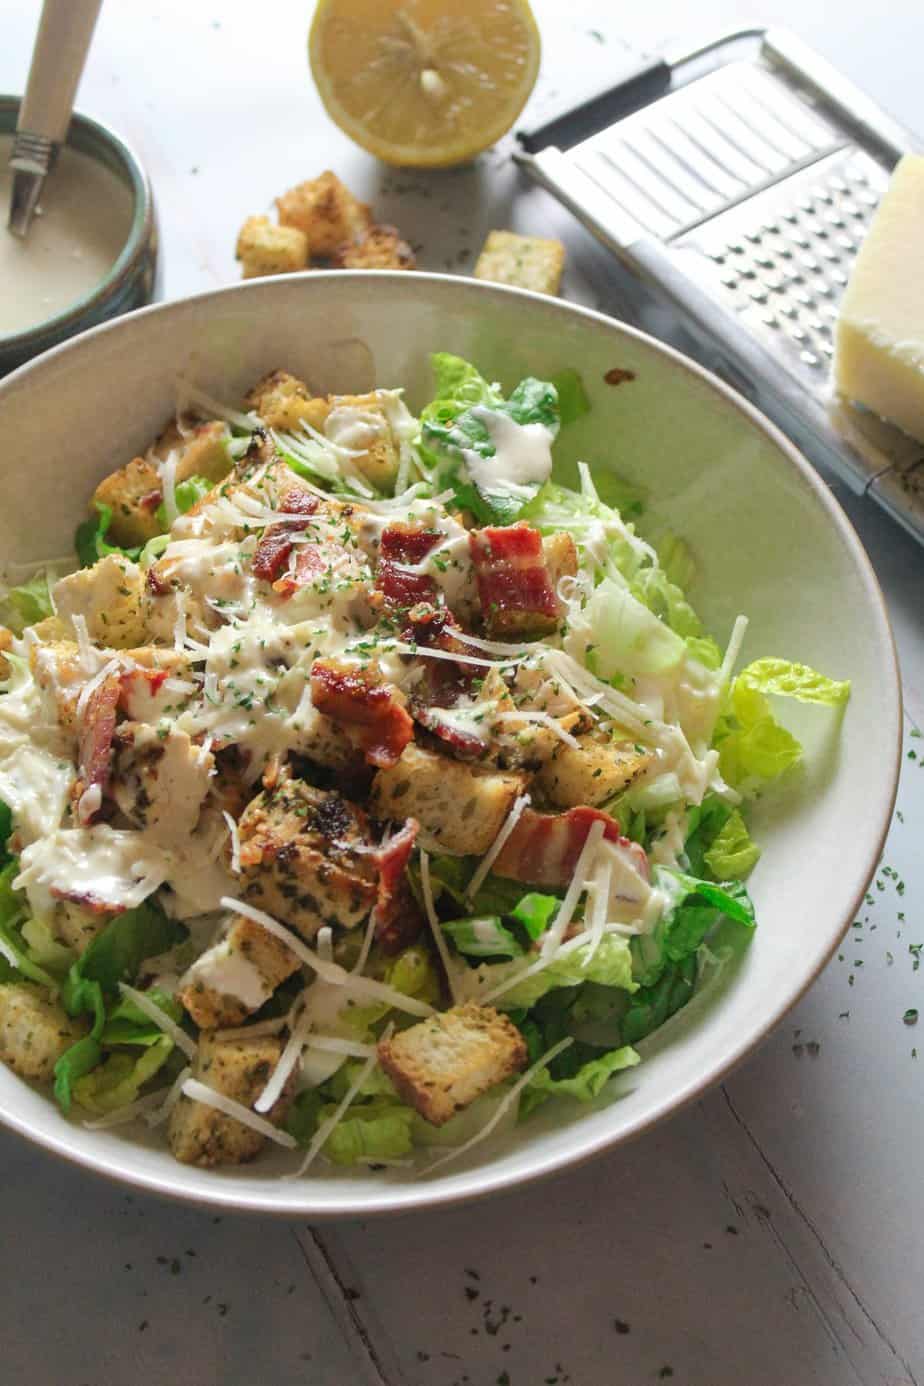 Caesar Salad with Easy Homemade Dressing, Chicken and Bacon